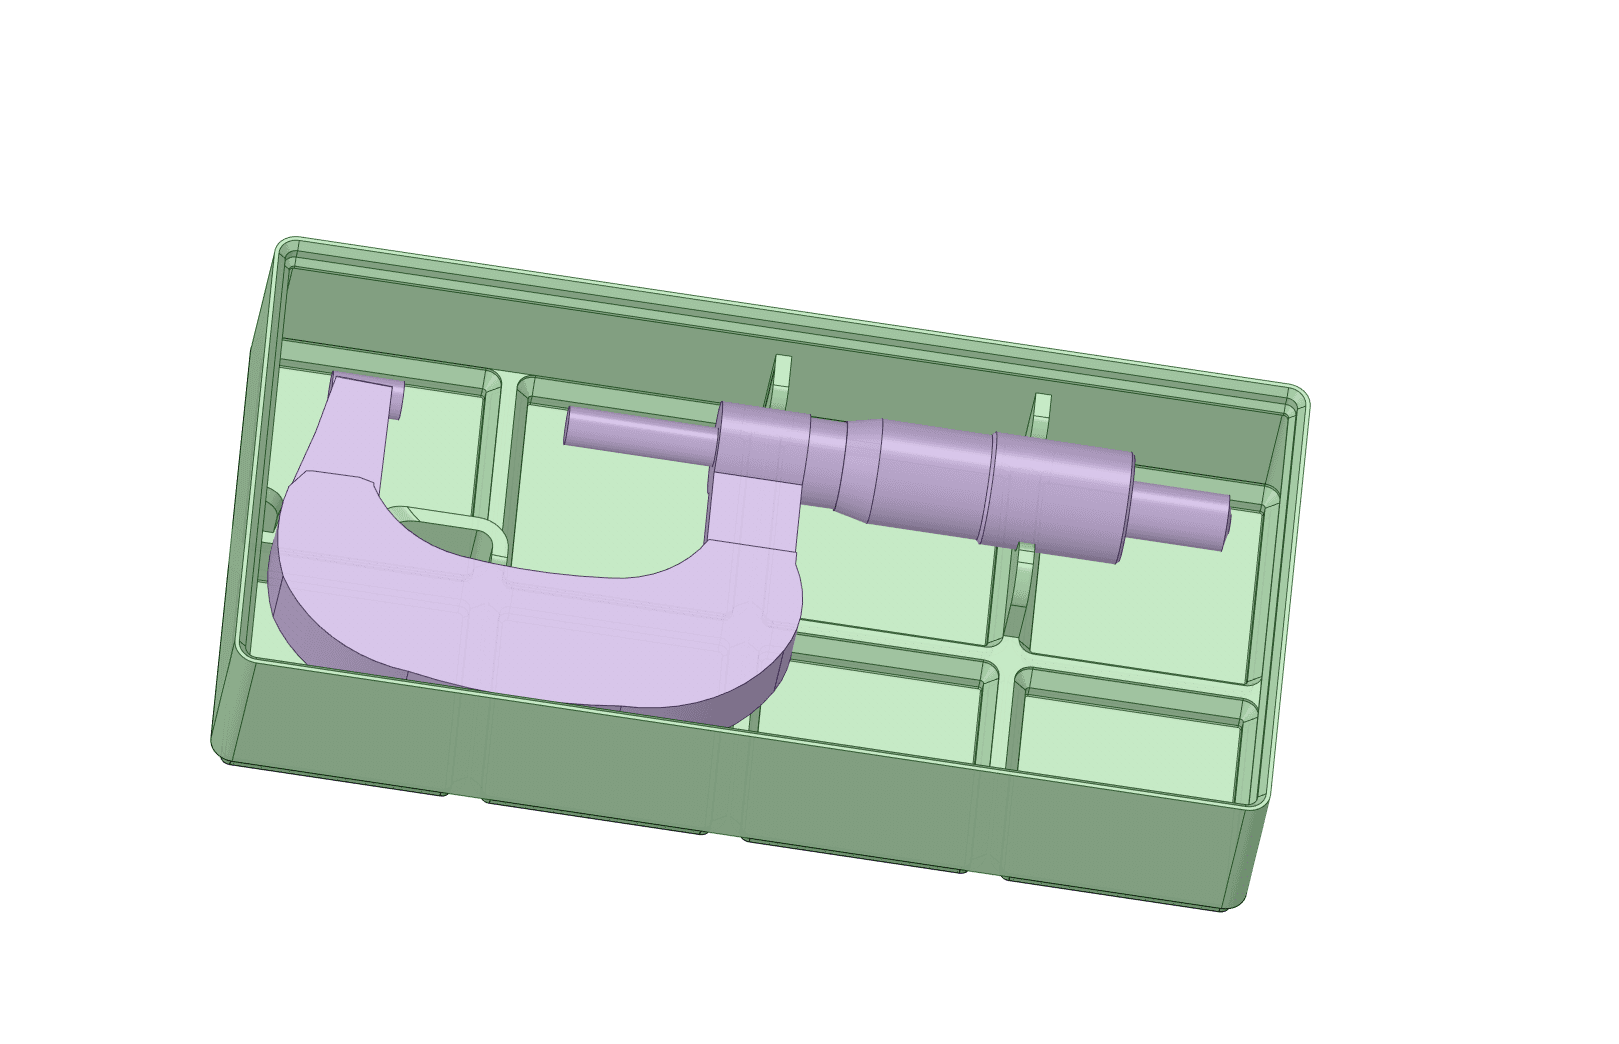 Micrometer Case - I created a 3D model of the micrometer to figure out how best to support it in the case. - 3d model